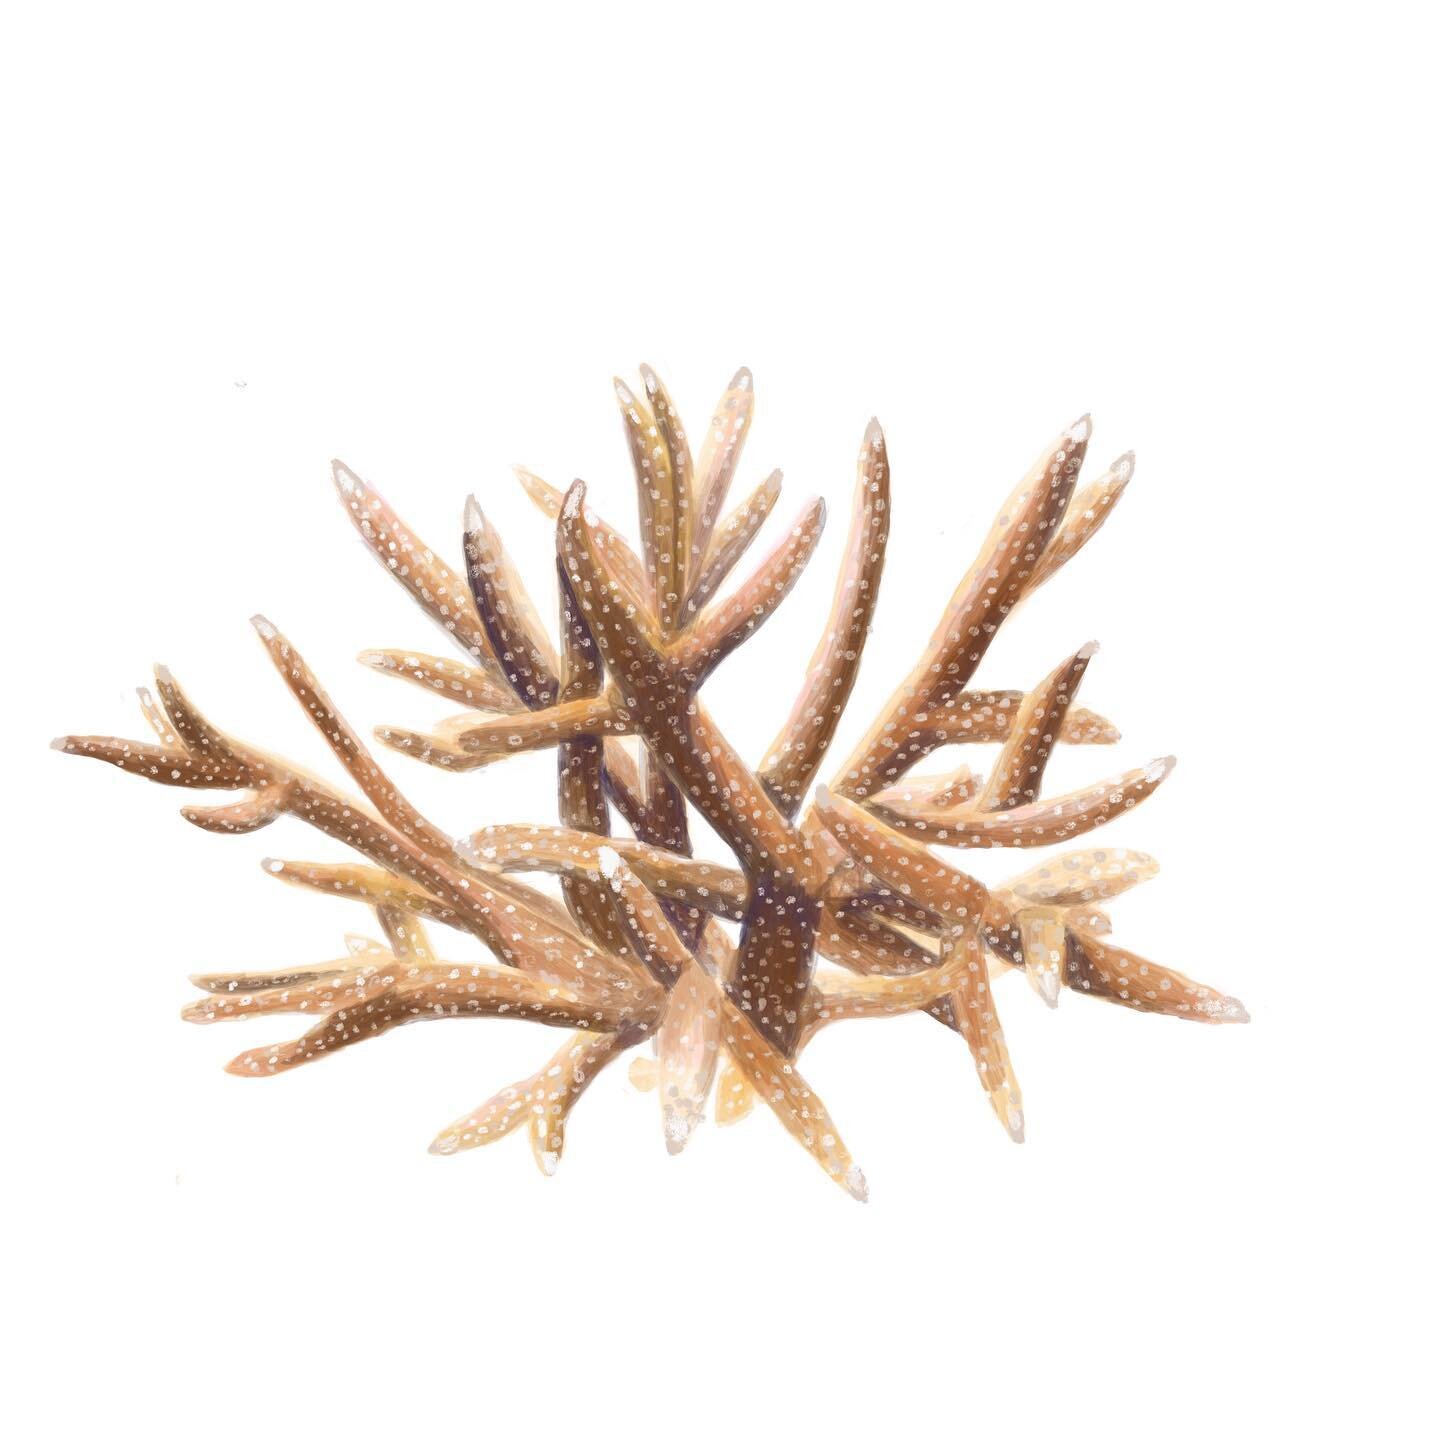 Staghorn Coral. Critically Endangered. This is one of the most important corals in the Caribbean, having built reefs that are 5,000 years old that are home to other animals. This coral was affected by a severe disease in the 1980s that wiped out a si